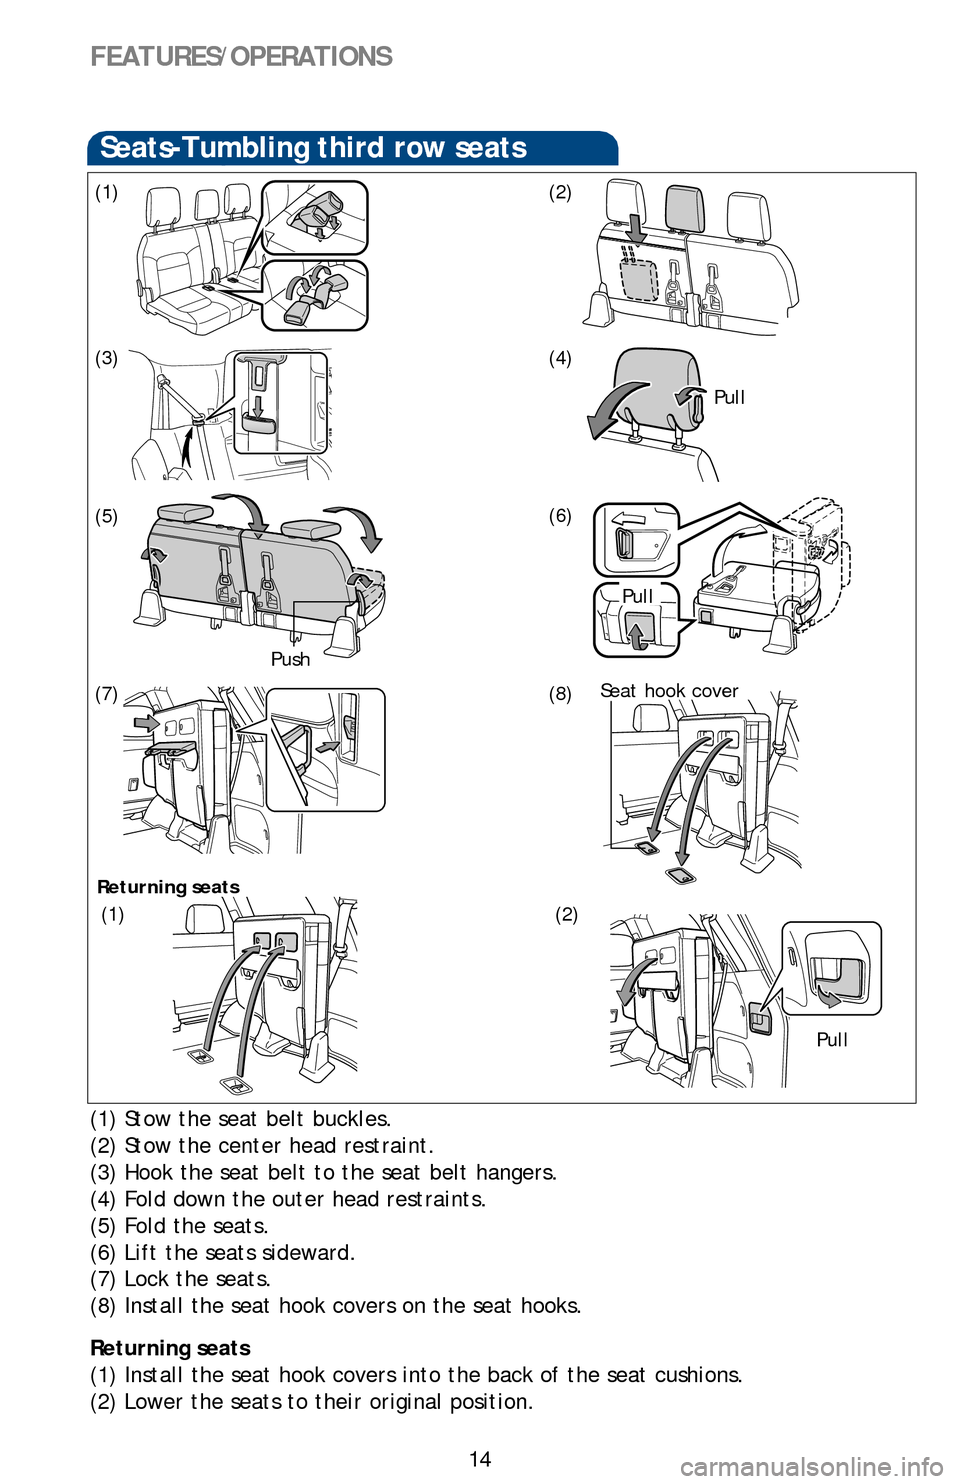 TOYOTA LAND CRUISER 2016 J200 Quick Reference Guide 14
FEATURES/OPERATIONS
(1) Stow the seat belt buckles.
(2) Stow the center head restraint.
(3) Hook the seat belt to the seat belt hangers.
(4) Fold down the outer head restraints.
(5) Fold the seats.